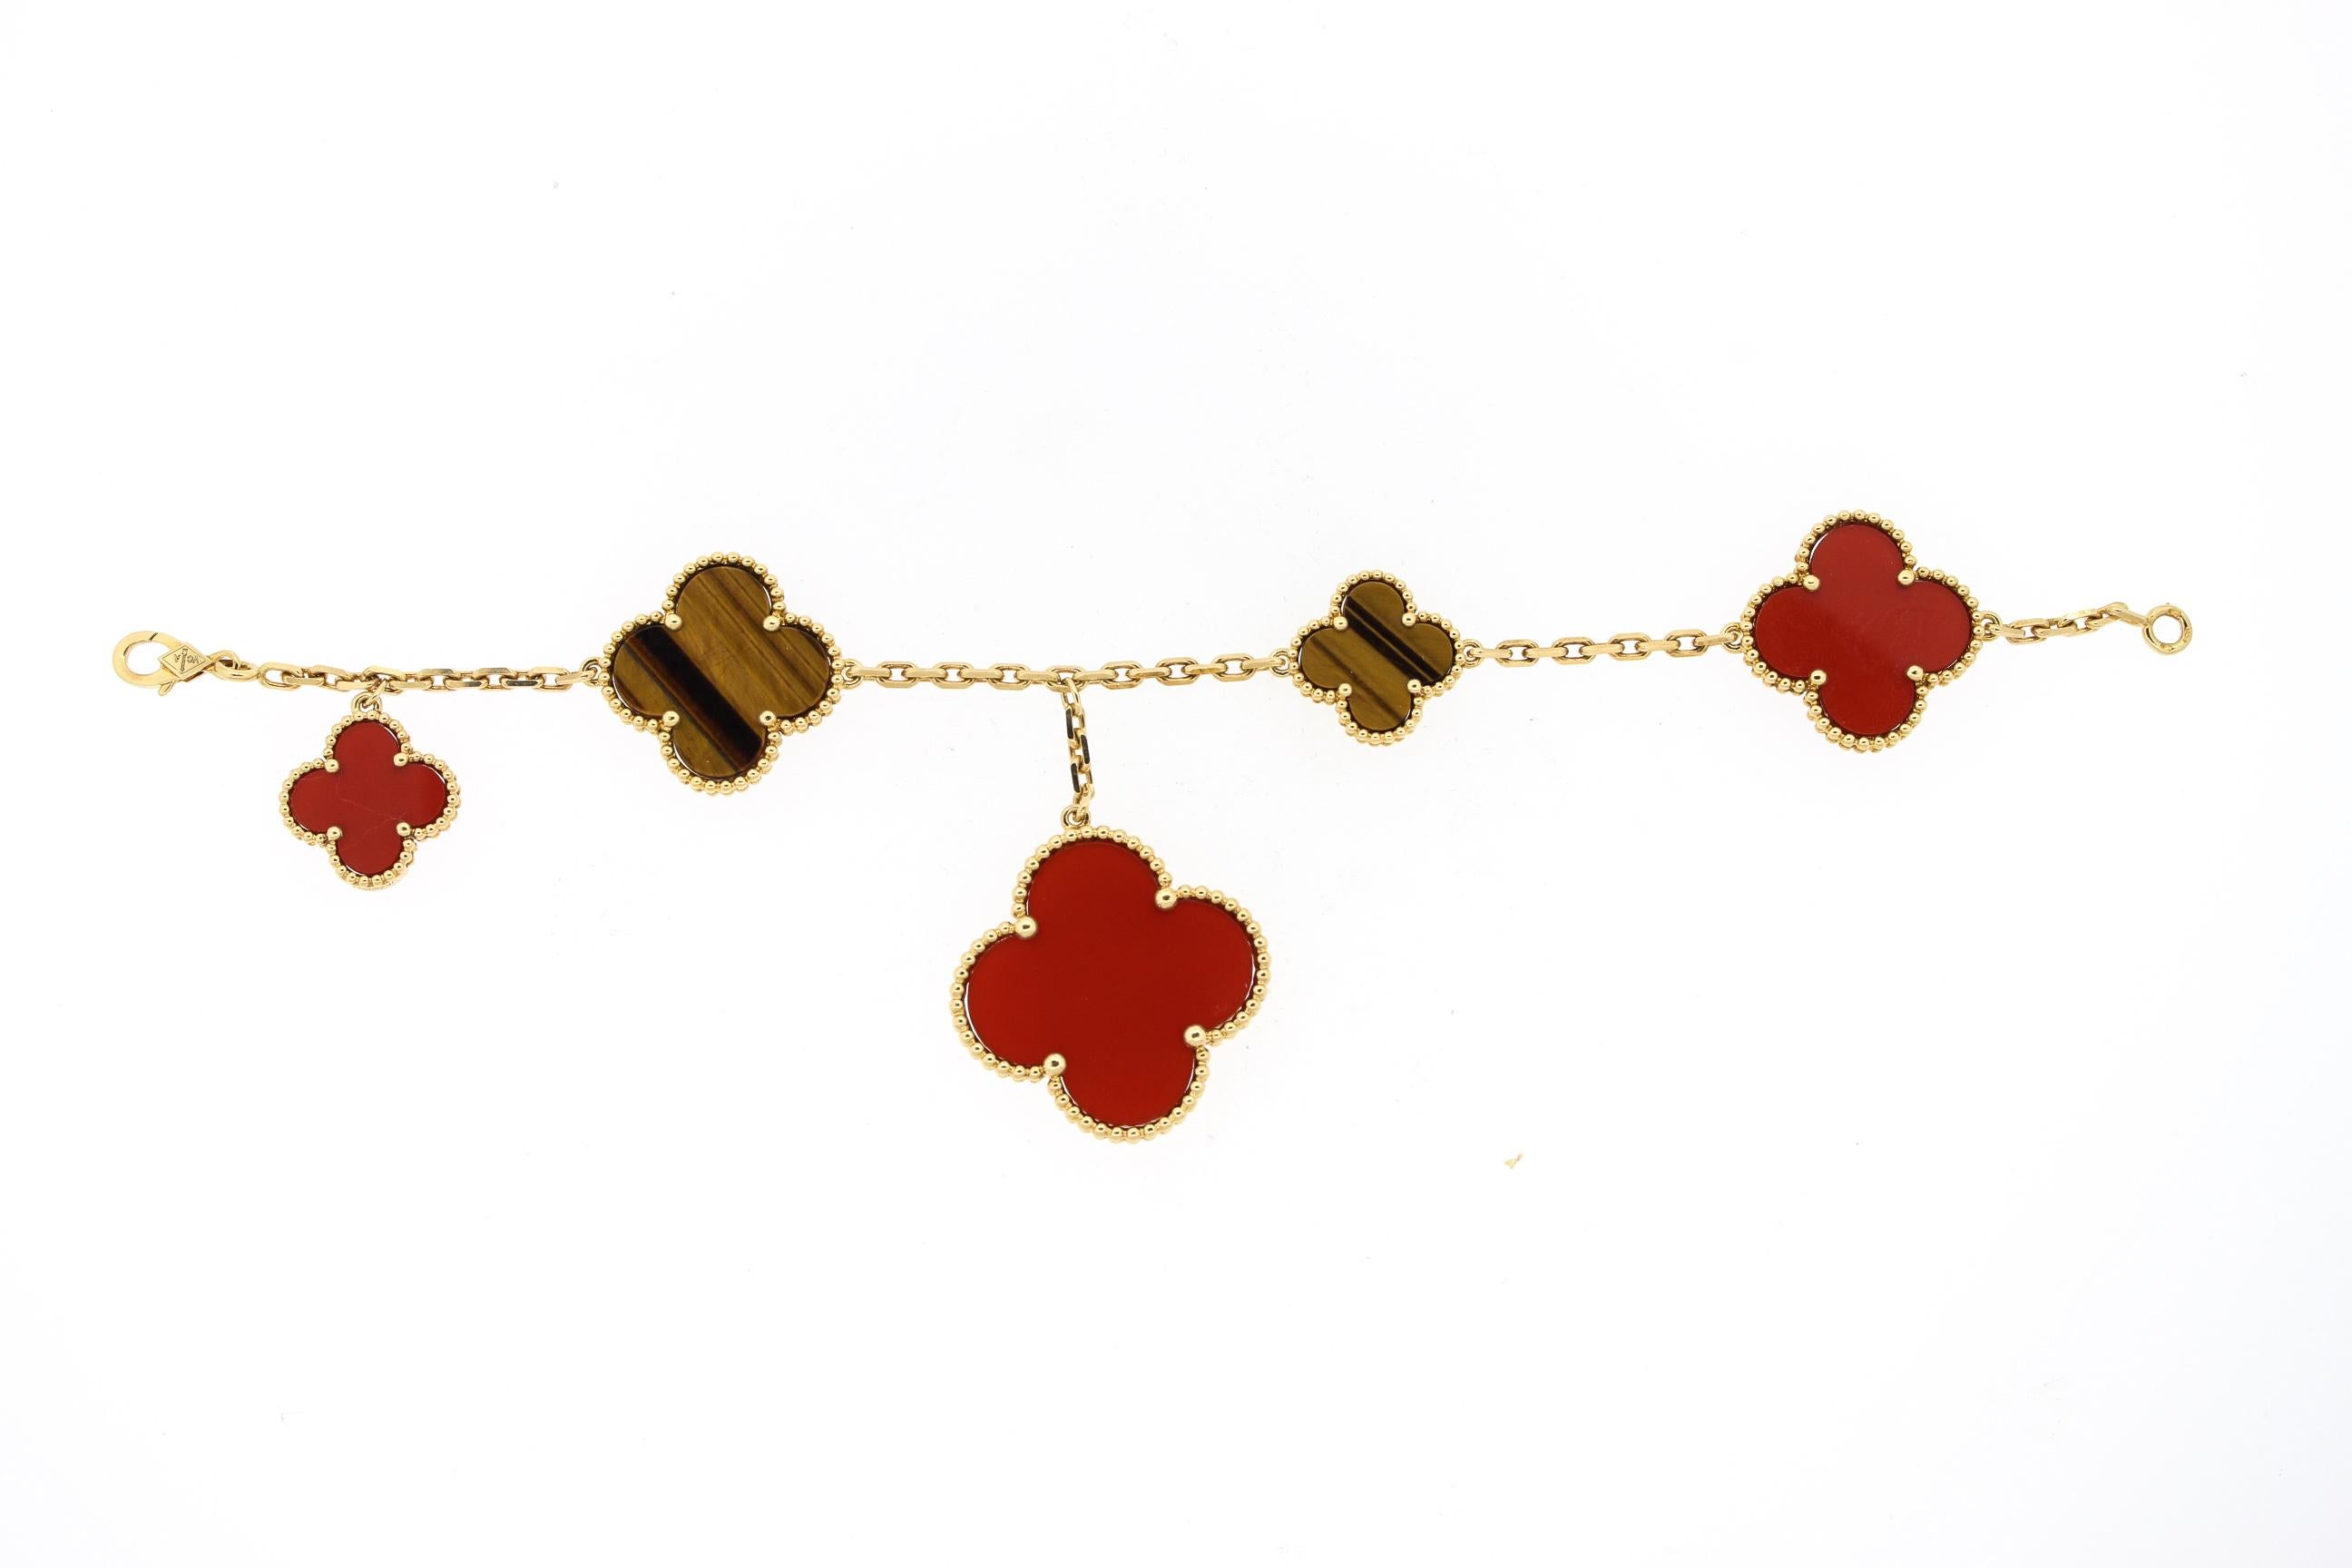 This modern 18k yellow gold carnelian and tiger's eye bracelet is part of the Lucky Alhambra collection by Van Cleef & Arpels. The bracelet is set with various sizes of the Alhambra clover. The two colors are complimentary and great for fall colors!